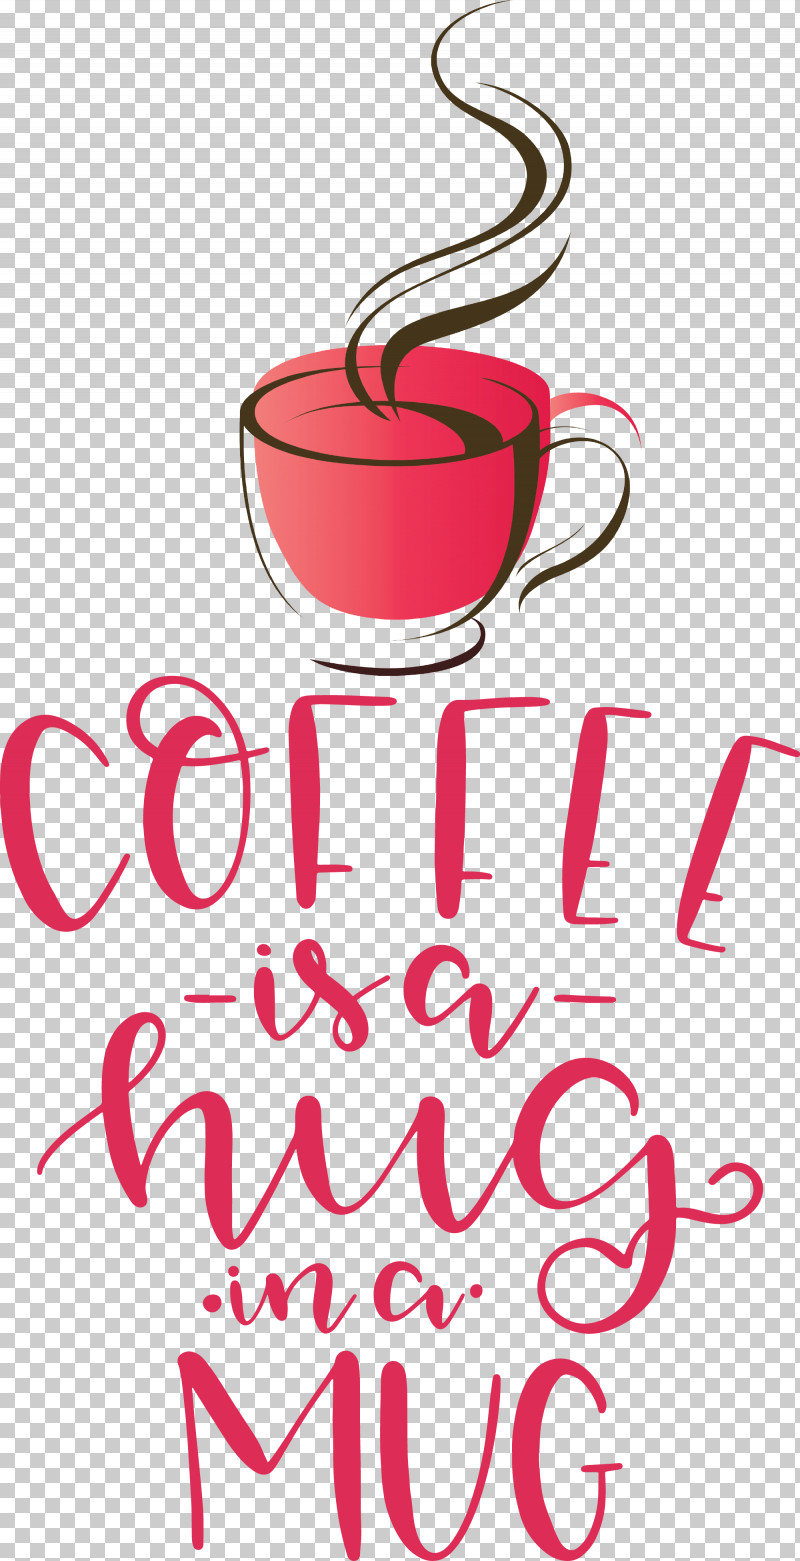 Coffee Coffee Is A Hug In A Mug Coffee Quote PNG, Clipart, Calligraphy, Coffee, Coffee Quote, Coffee Service, Geometry Free PNG Download